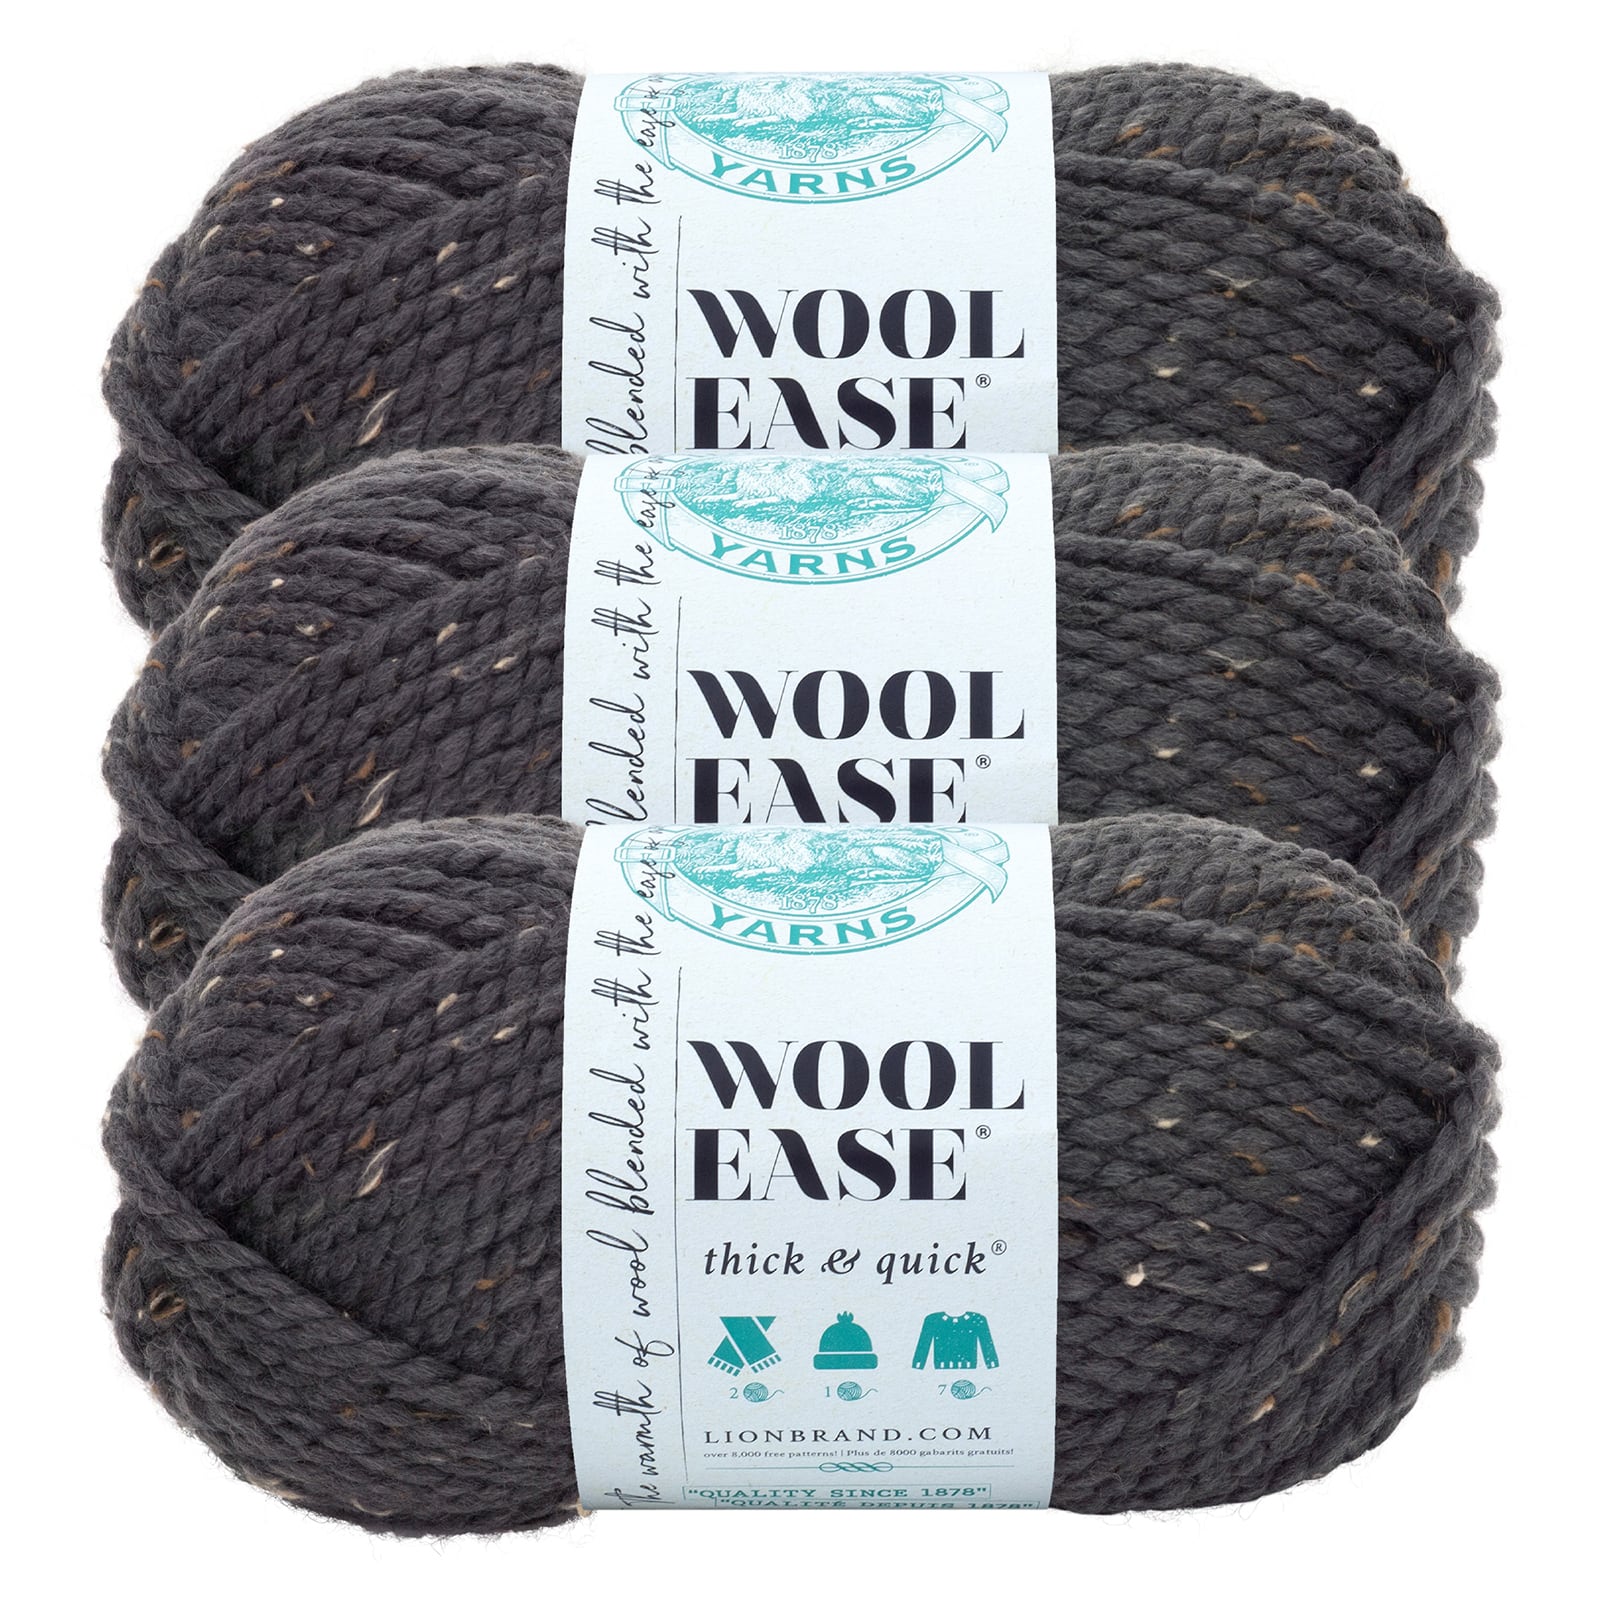 Wool Ease Lion Brand Yarn Thick & Quick Dark Gray Wool Blend Lot of 2  Skeins